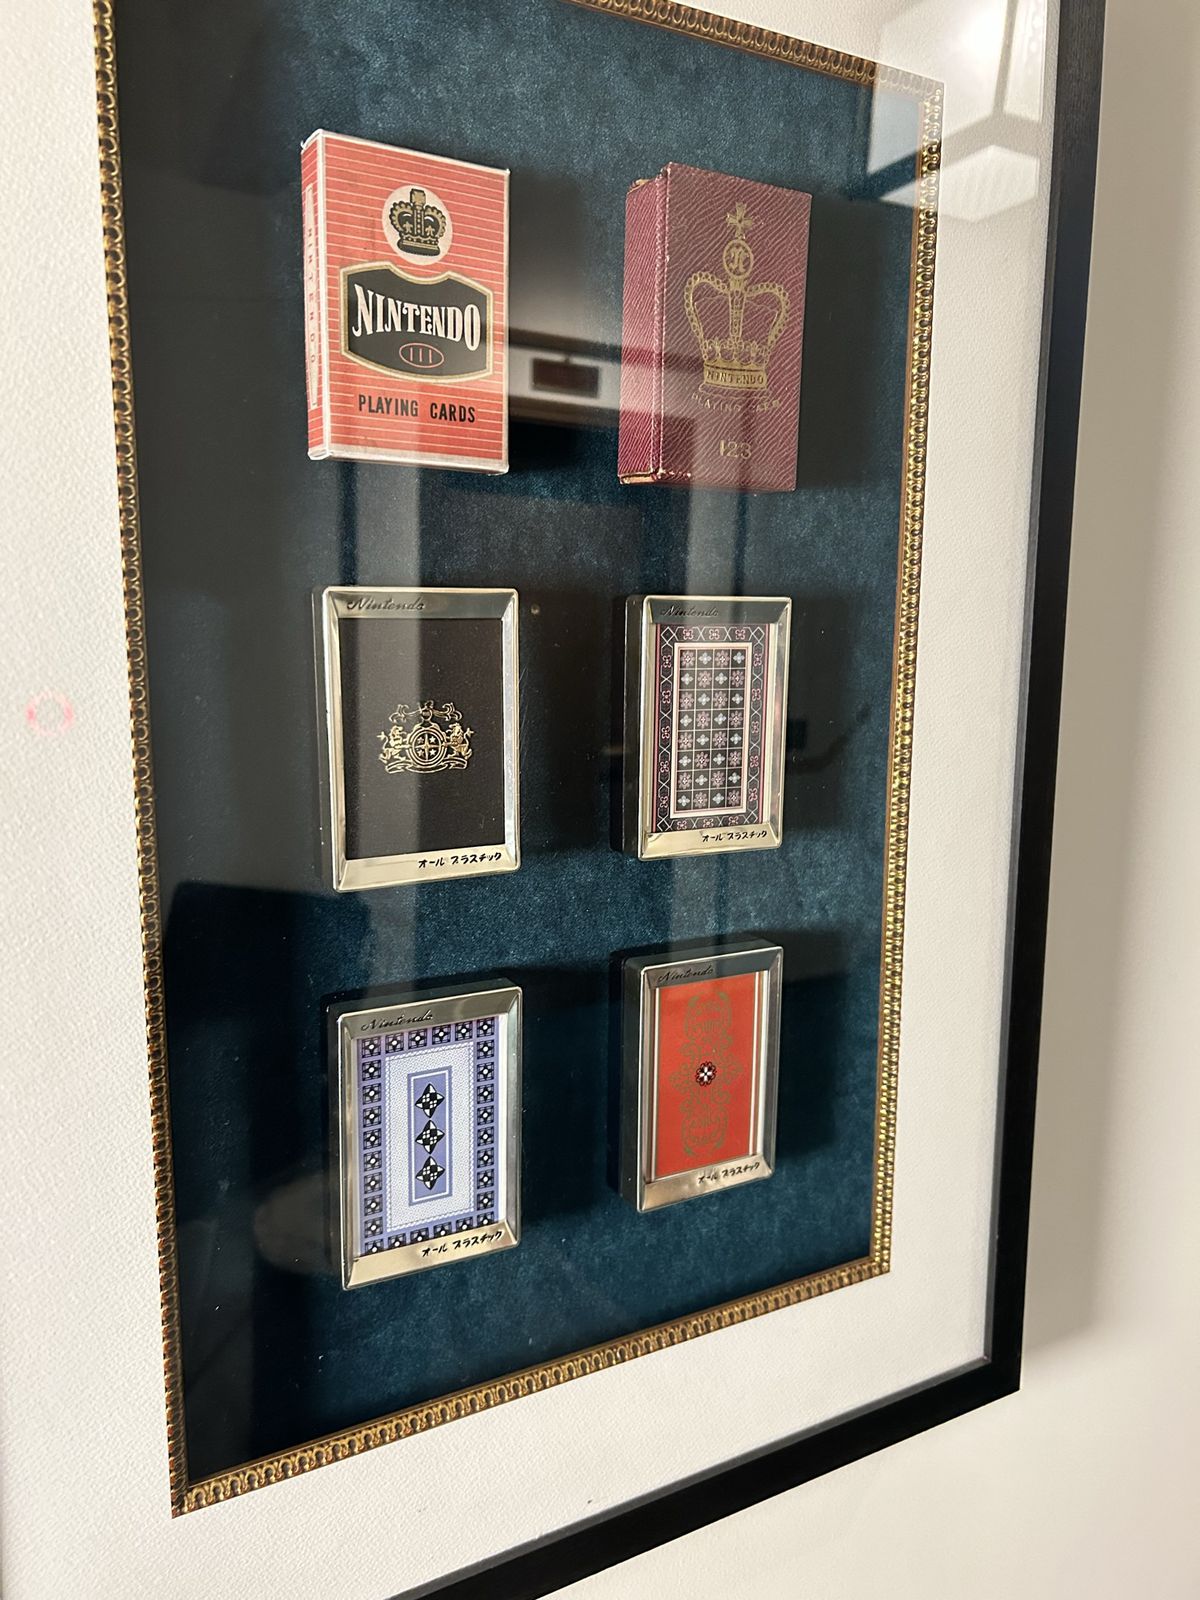 A collection of vintage playing cards from Nintendo’s days as a card company, displayed under glass at the Marufukuro in Kyoto